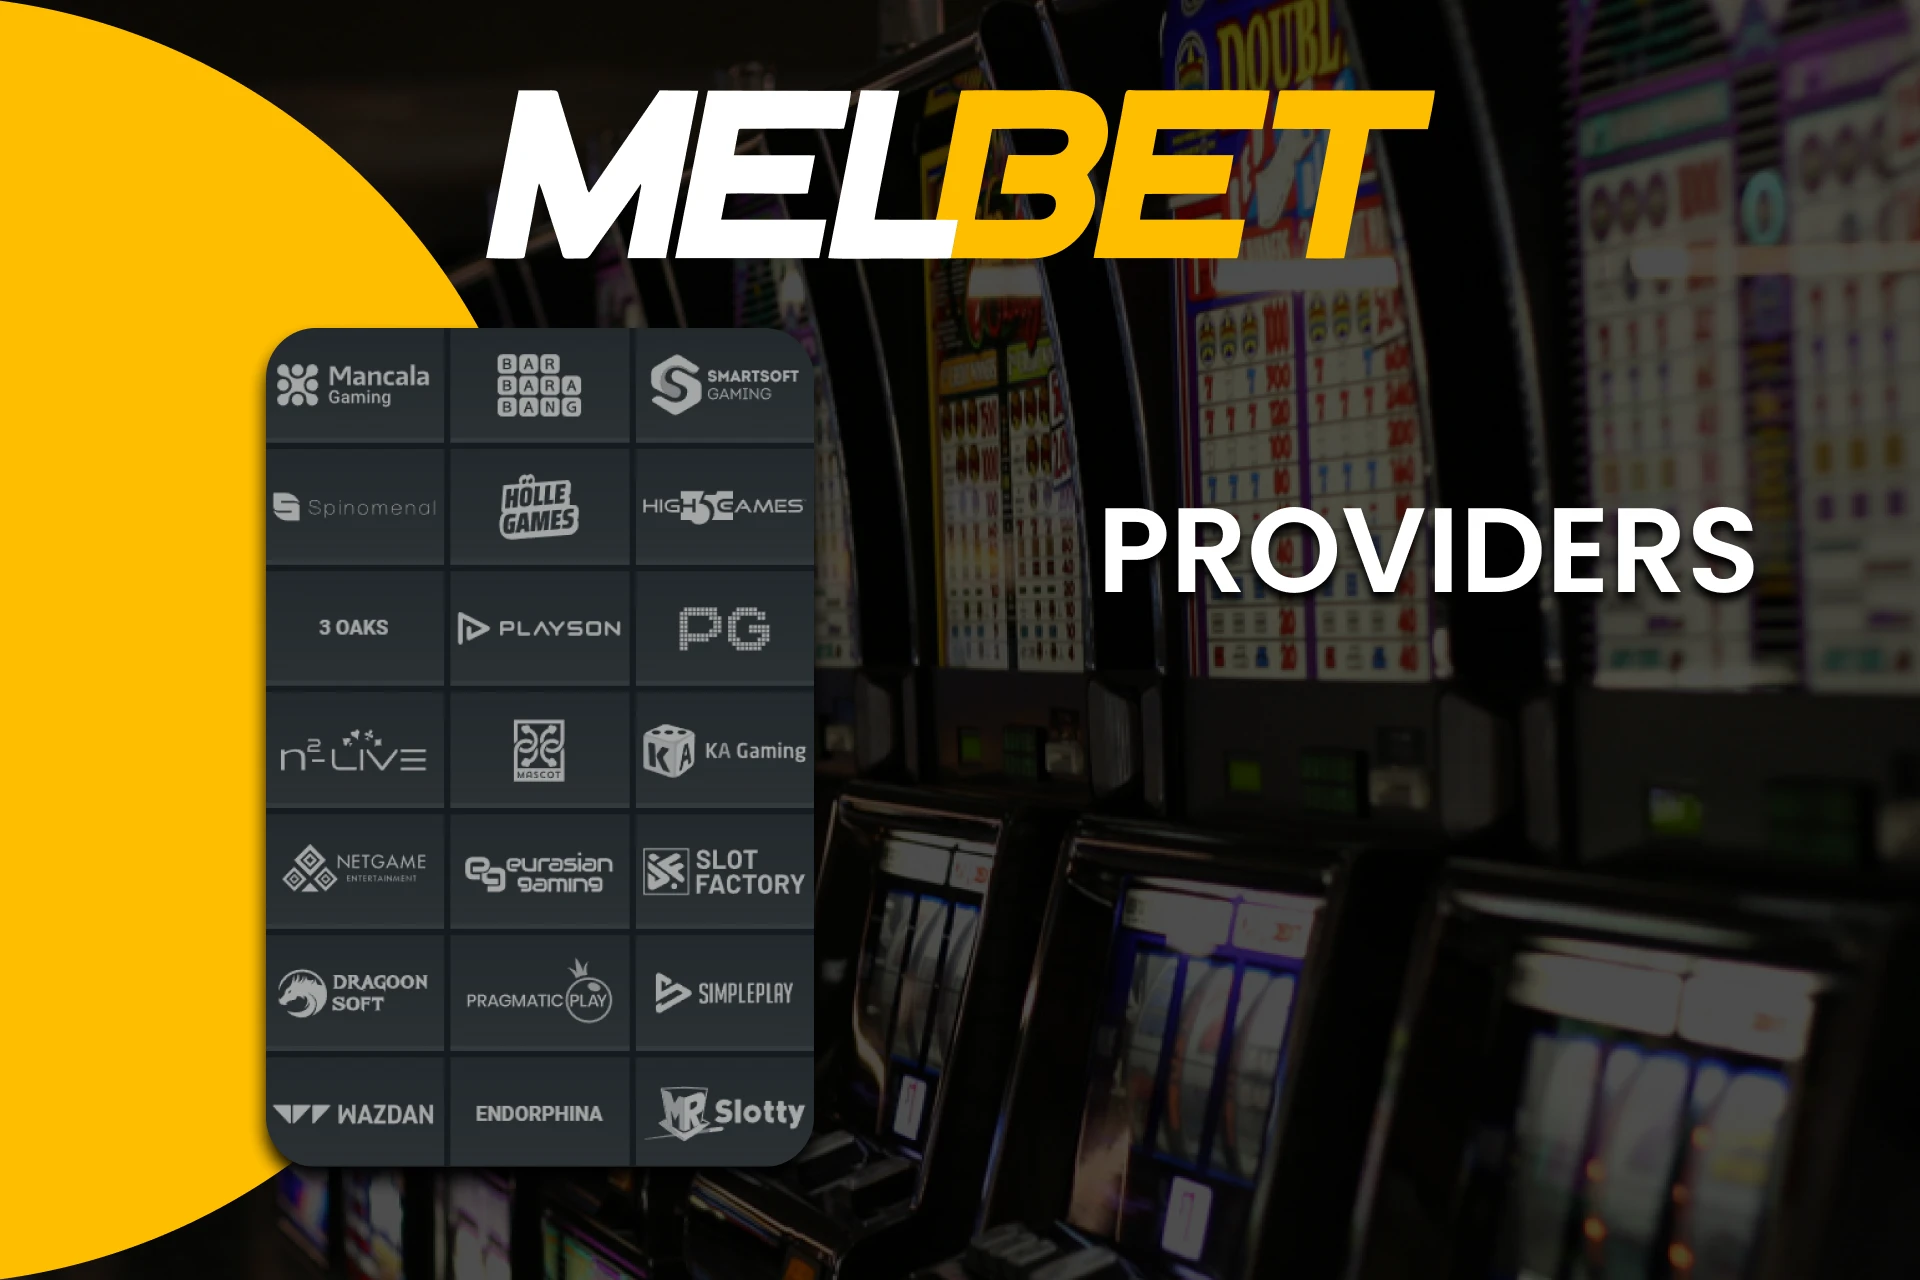 Melbet provides many providers for Slots.